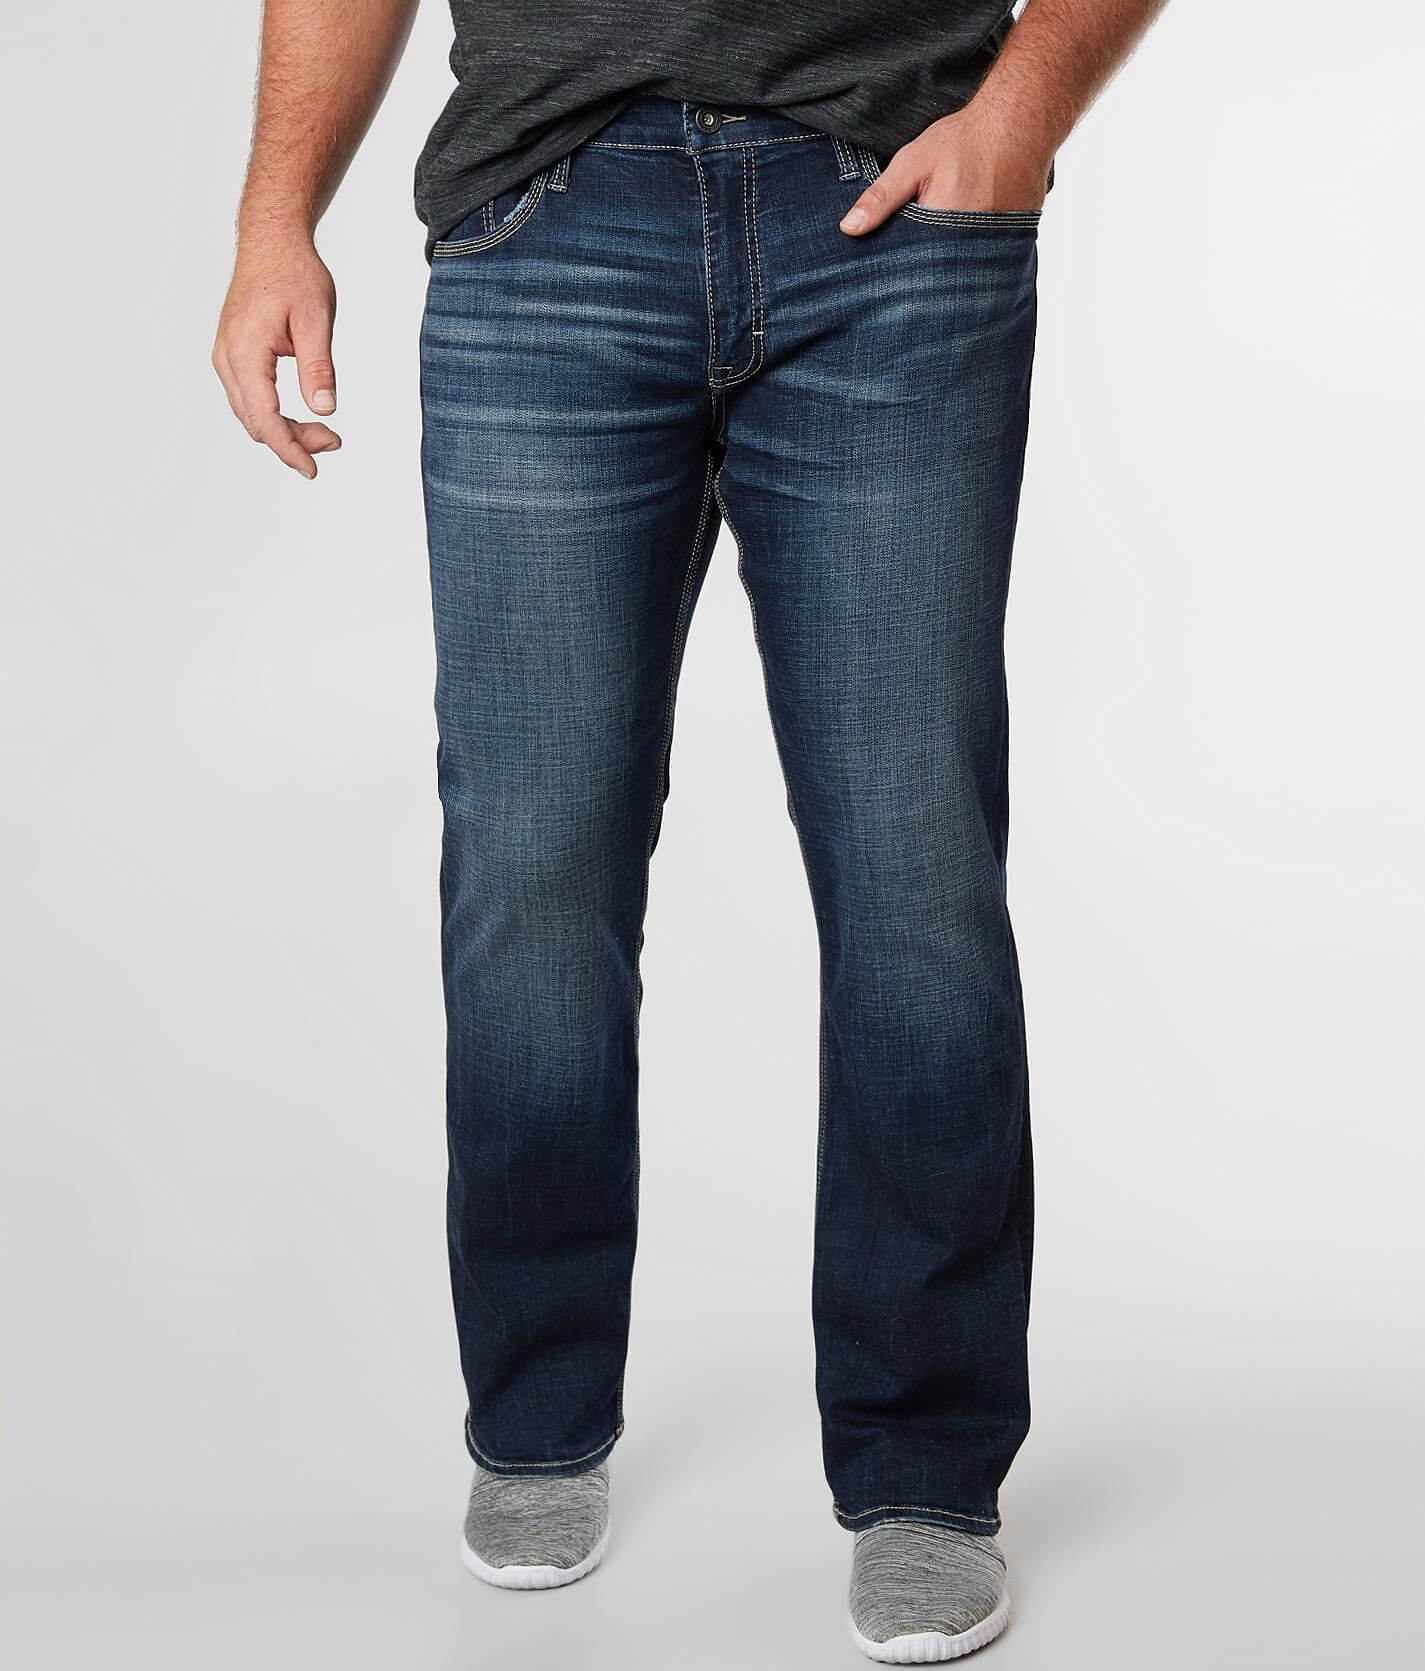 buckle tall jeans